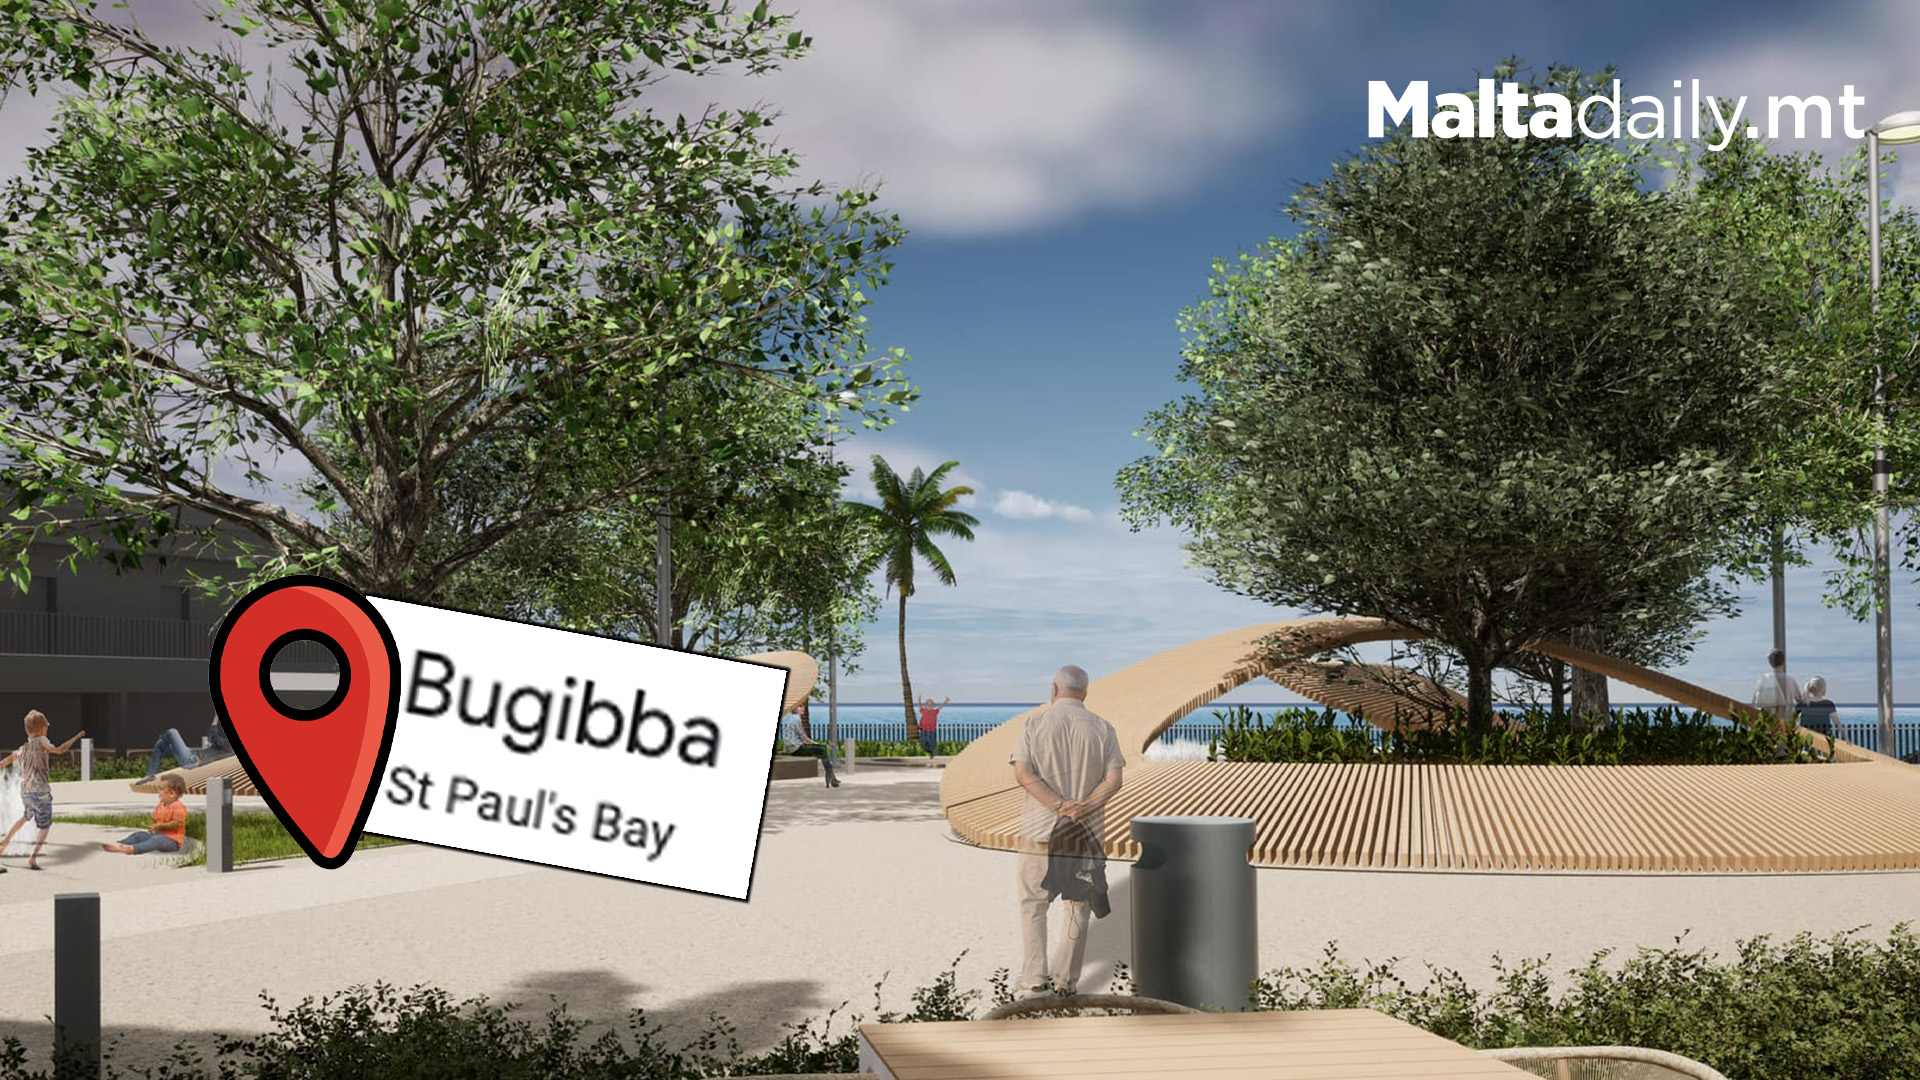 Here's How The Buġibba Square Will Look Like